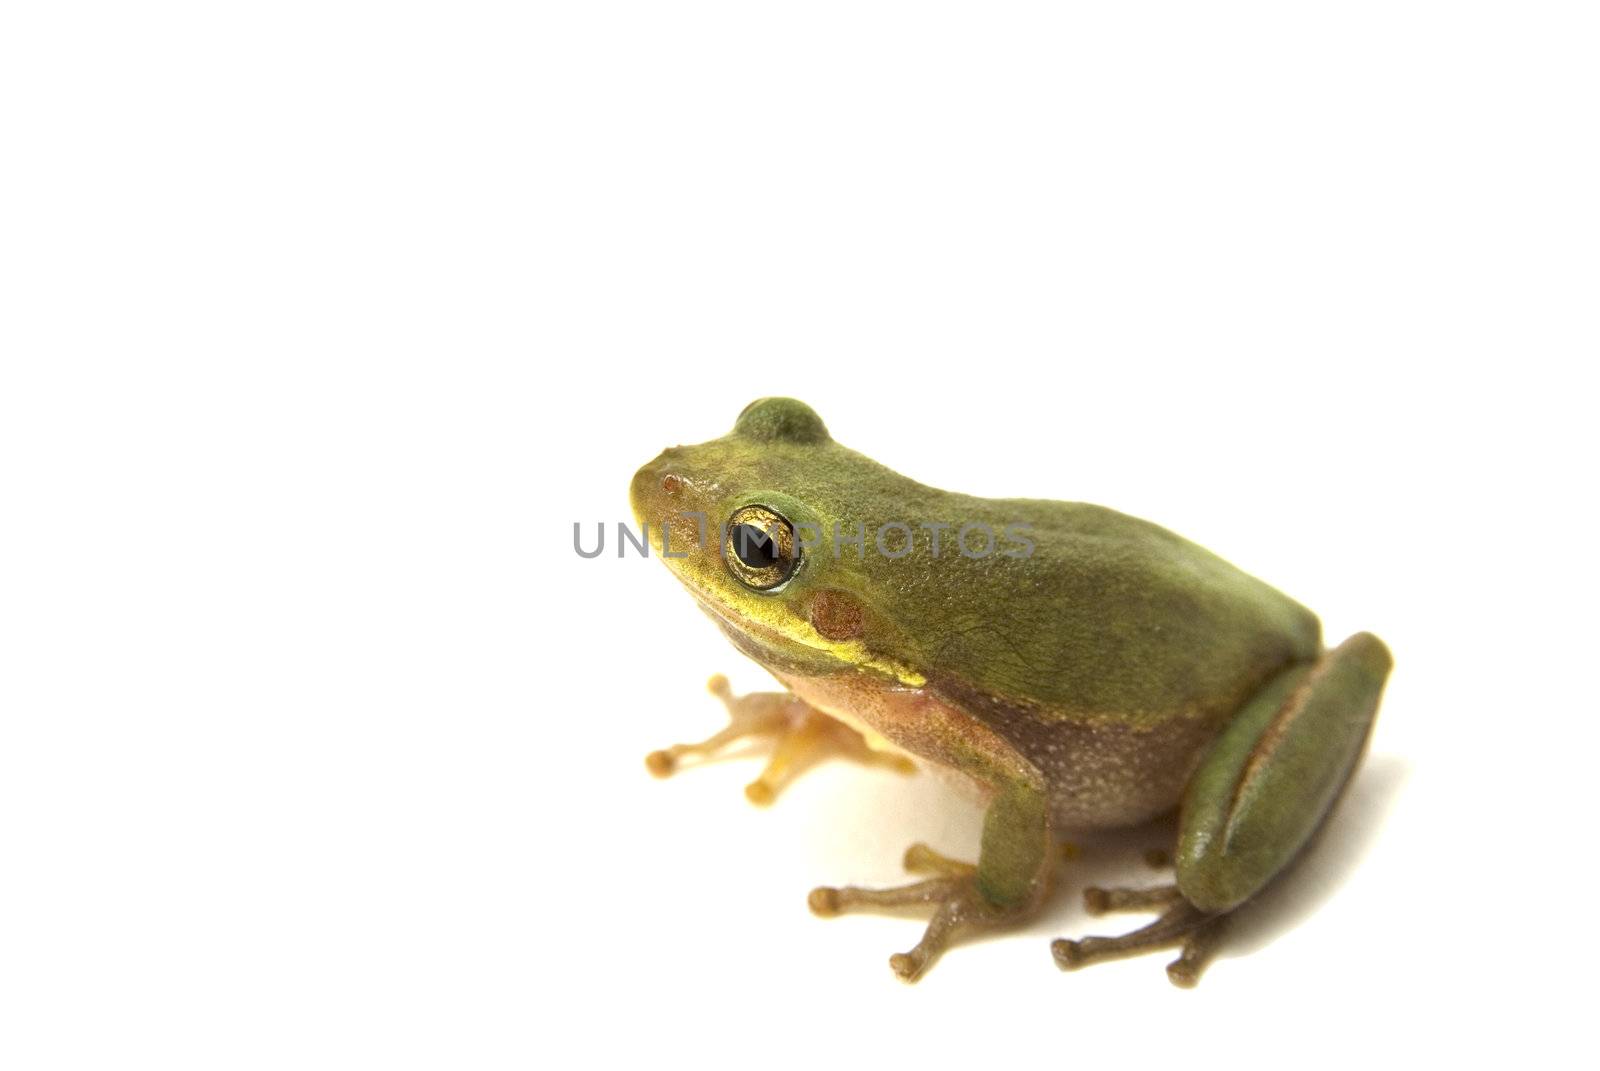 Squirrel Tree Frog (Hyla squirella) isolated on white background